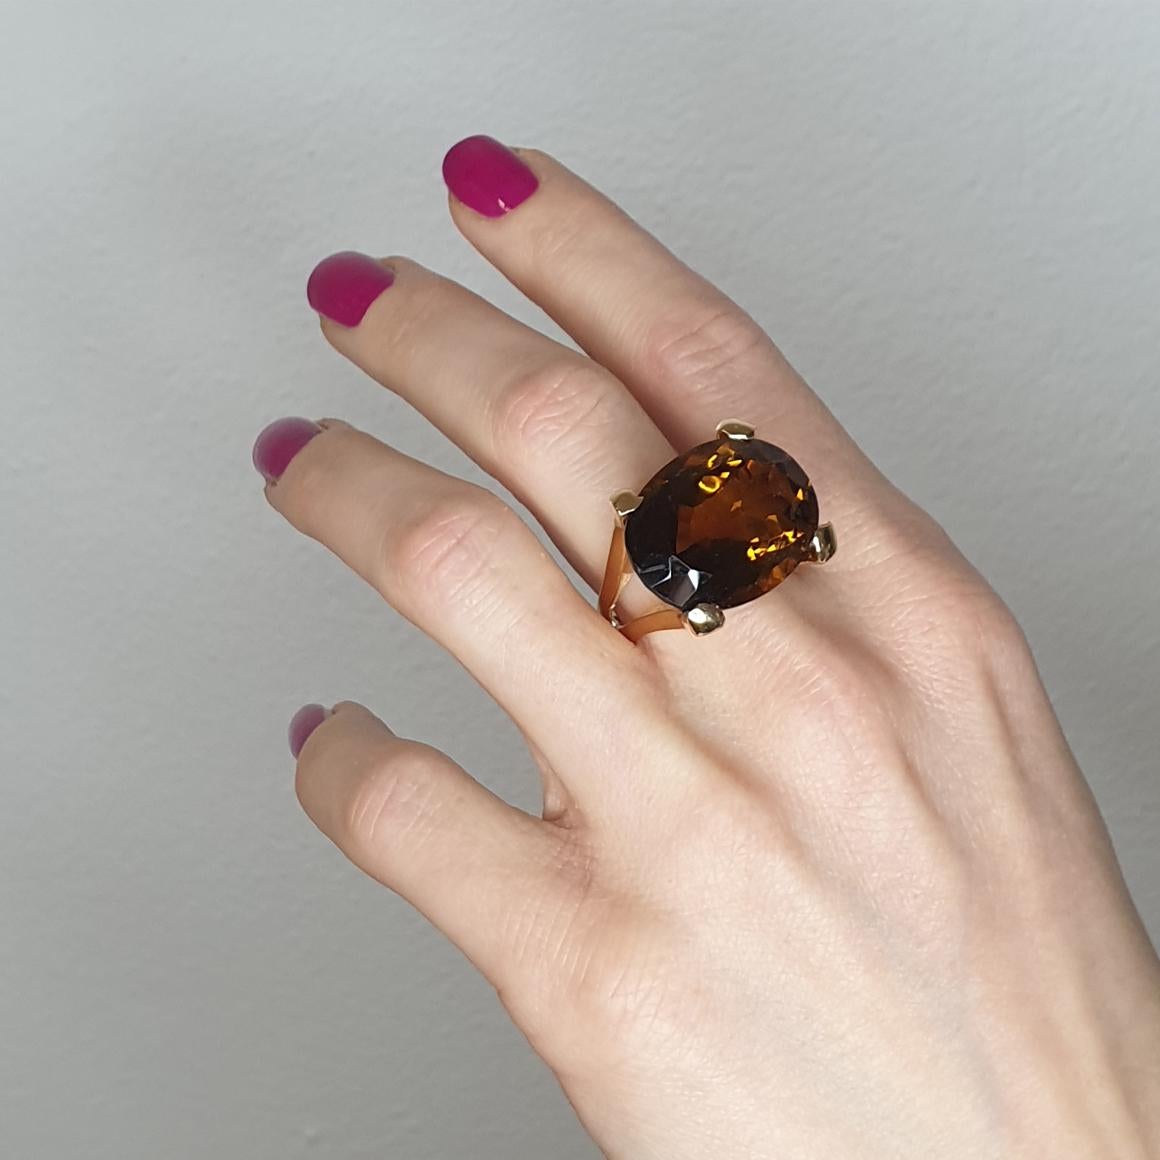 Amazing Big stone for this fahion ring in rose gold 18kt  handemade in Italy by Stanoppi Jewellery since 1948. g
Size :  EU  18 -   USA 8,5
Size of Stone mm 18x24

All Stanoppi Jewelry is neShiny yellow Sapphire, design and craftmanship handmade in